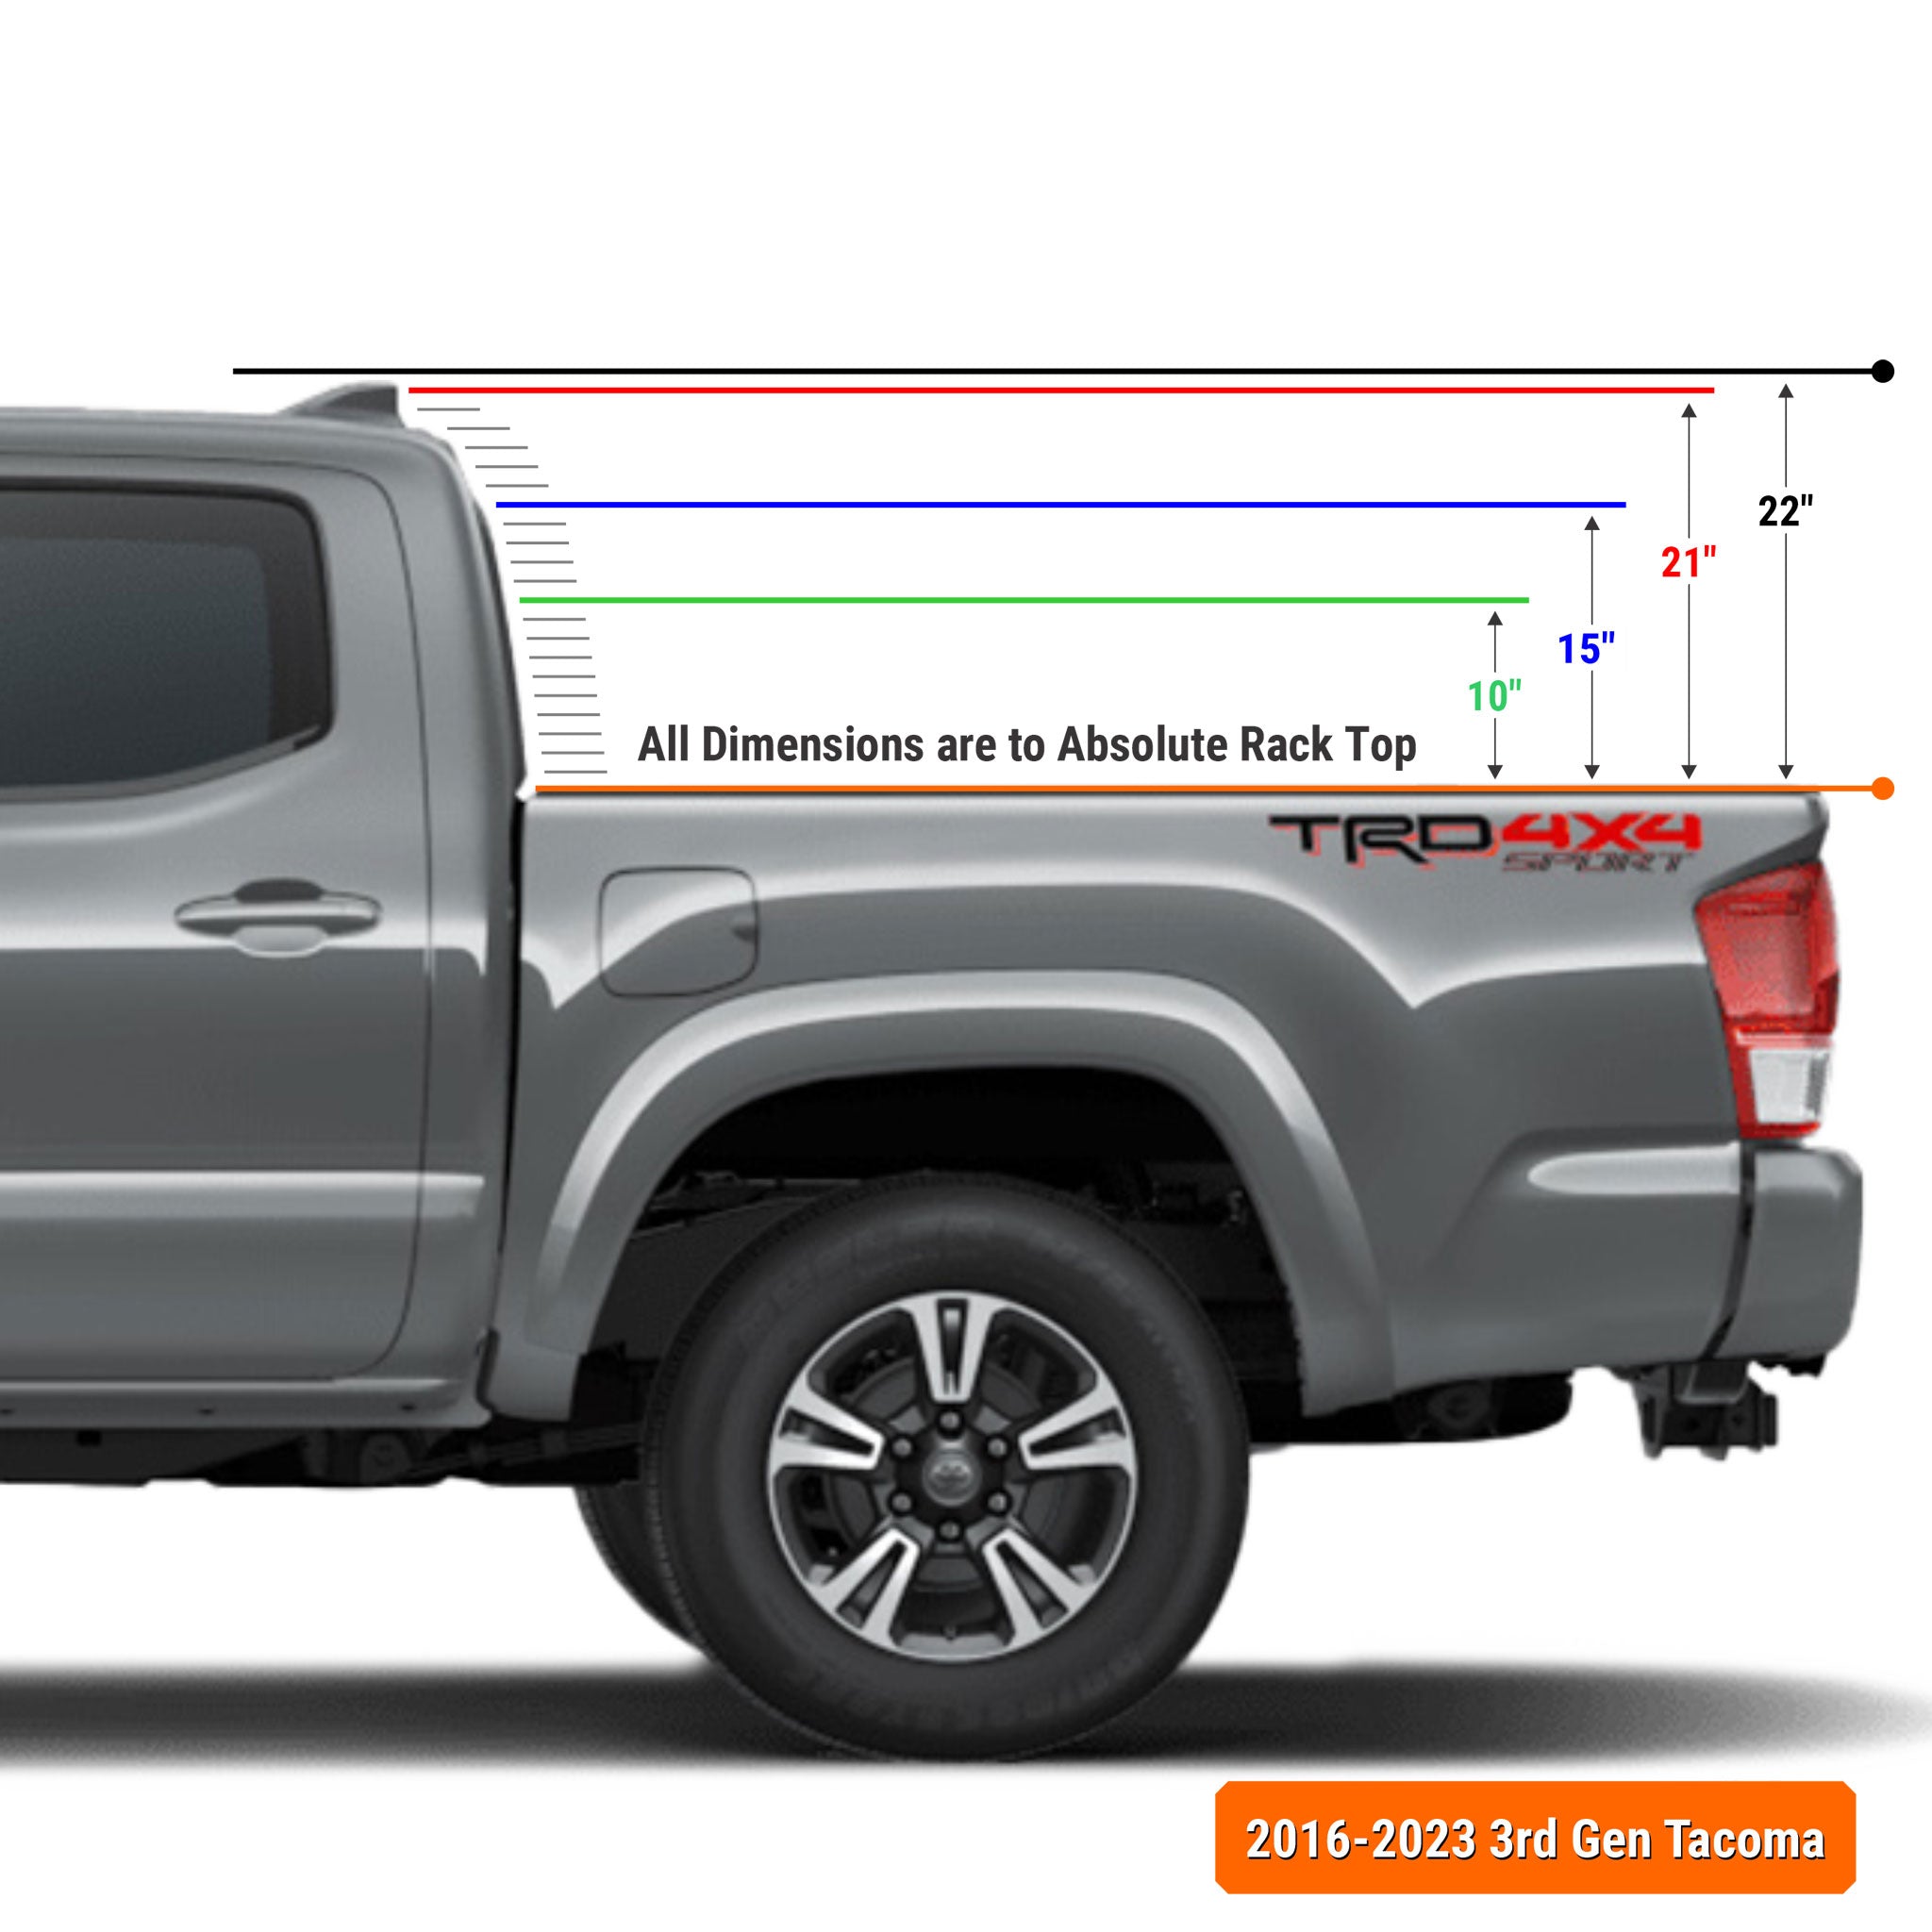 Toyota Tacoma Bed Rack Height Chart